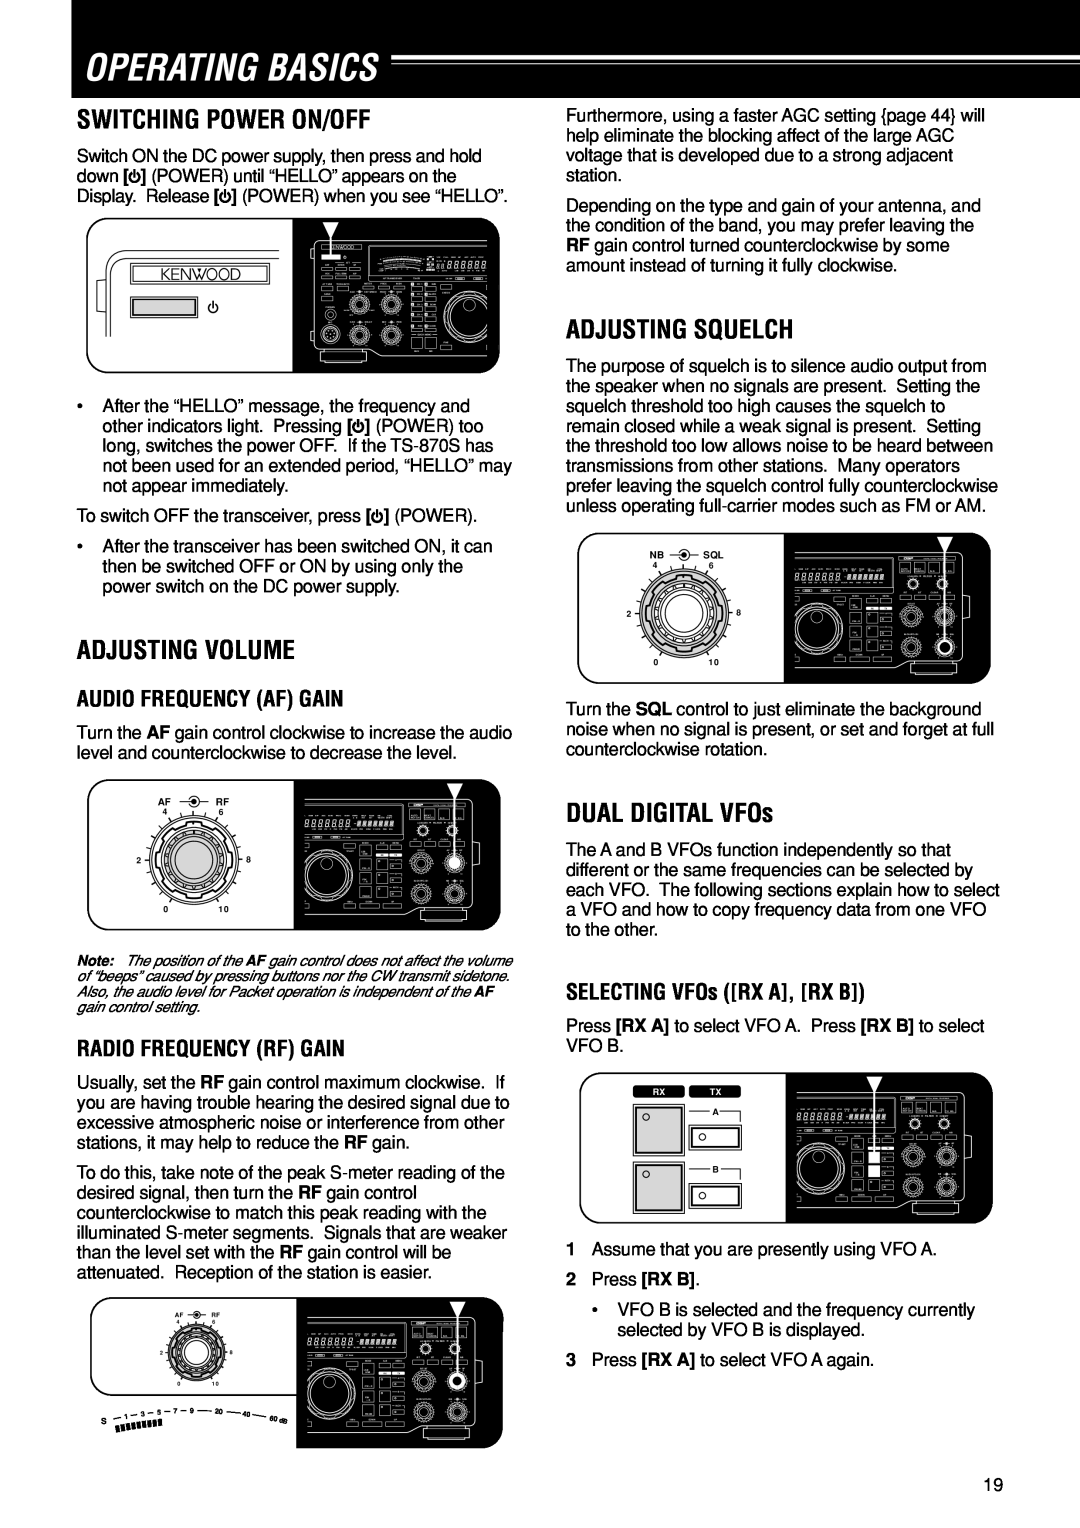 Kenwood TS-870S Operating Basics, Switching Power On/Off, Adjusting Volume, Adjusting Squelch, DUAL DIGITAL VFOs 